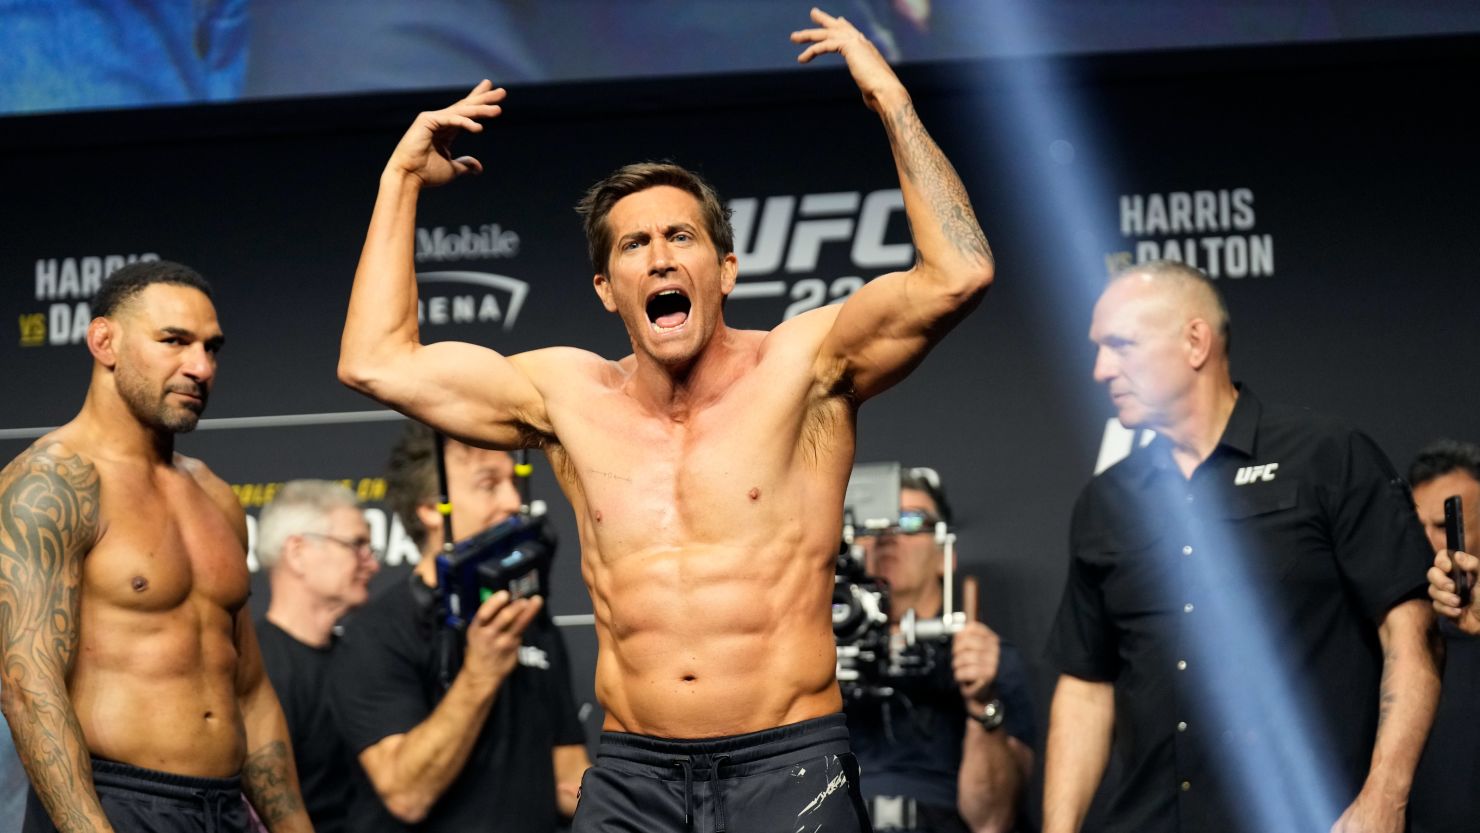 230304104354 Jake Gyllenhaal Ufc Weigh In 0303 Restricted ?c=16x9&q=h 833,w 1480,c Fill